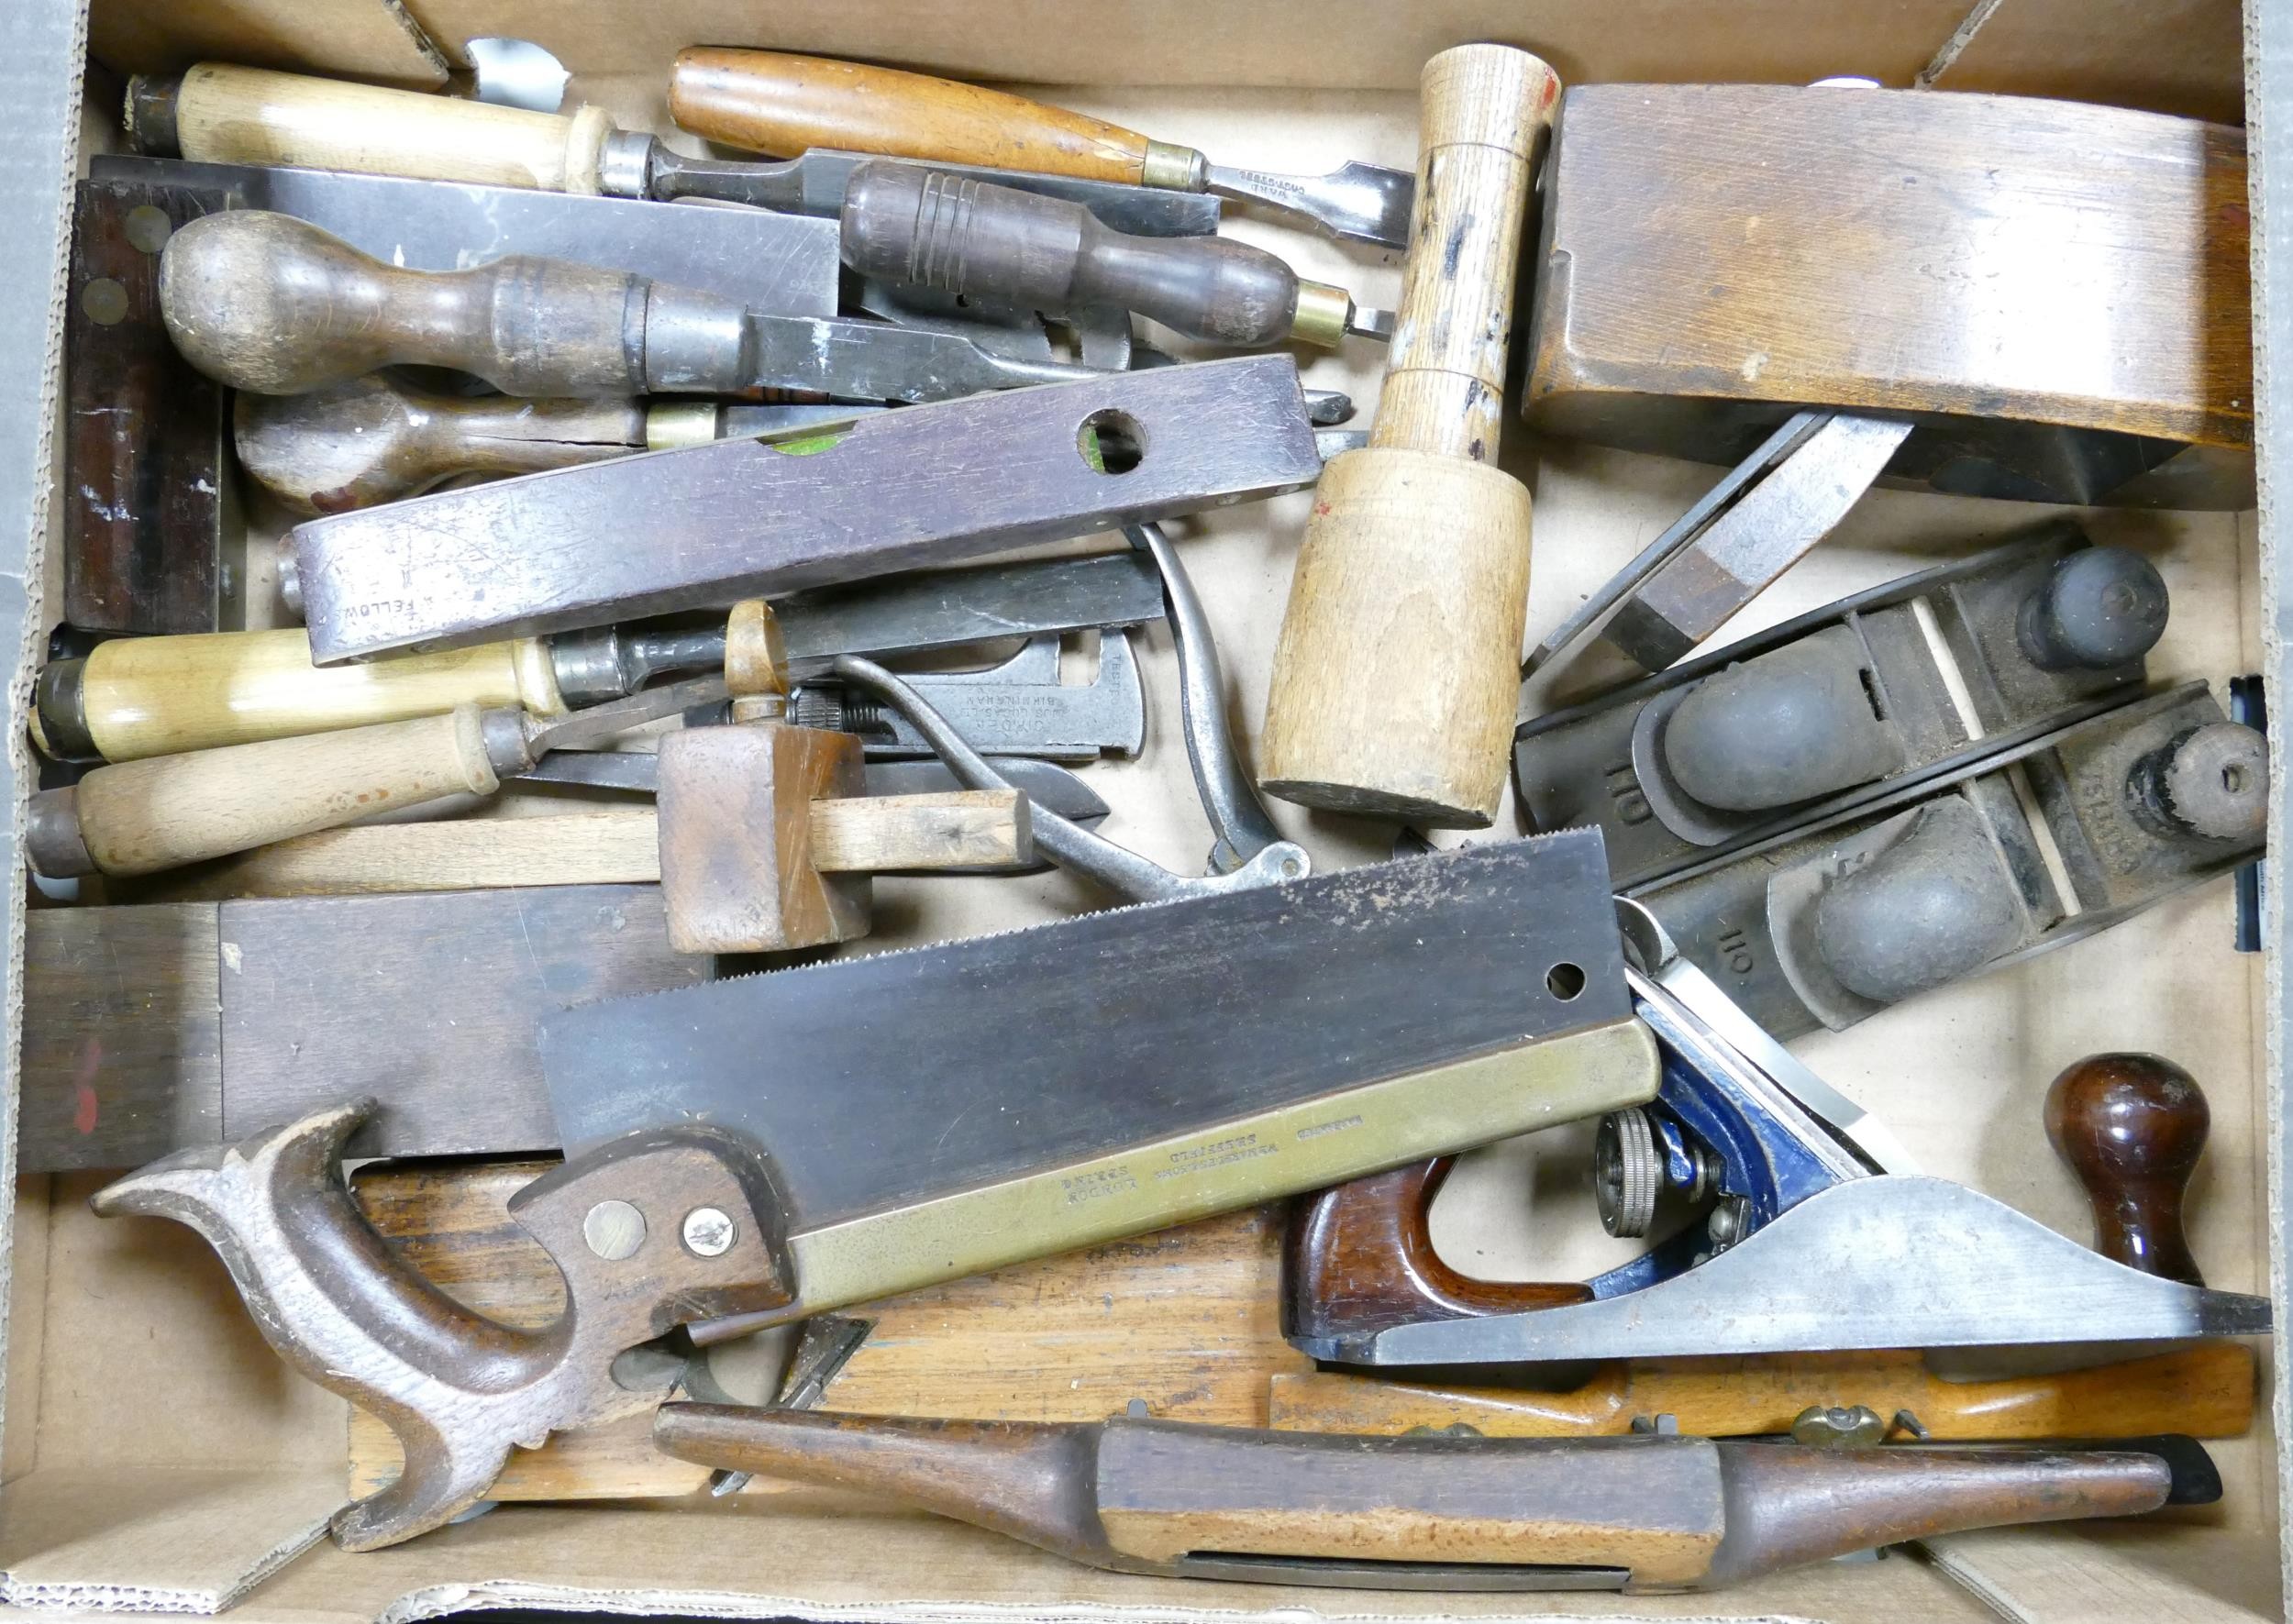 A collection of vintage wood working tools to include saws.planes, chisels etc